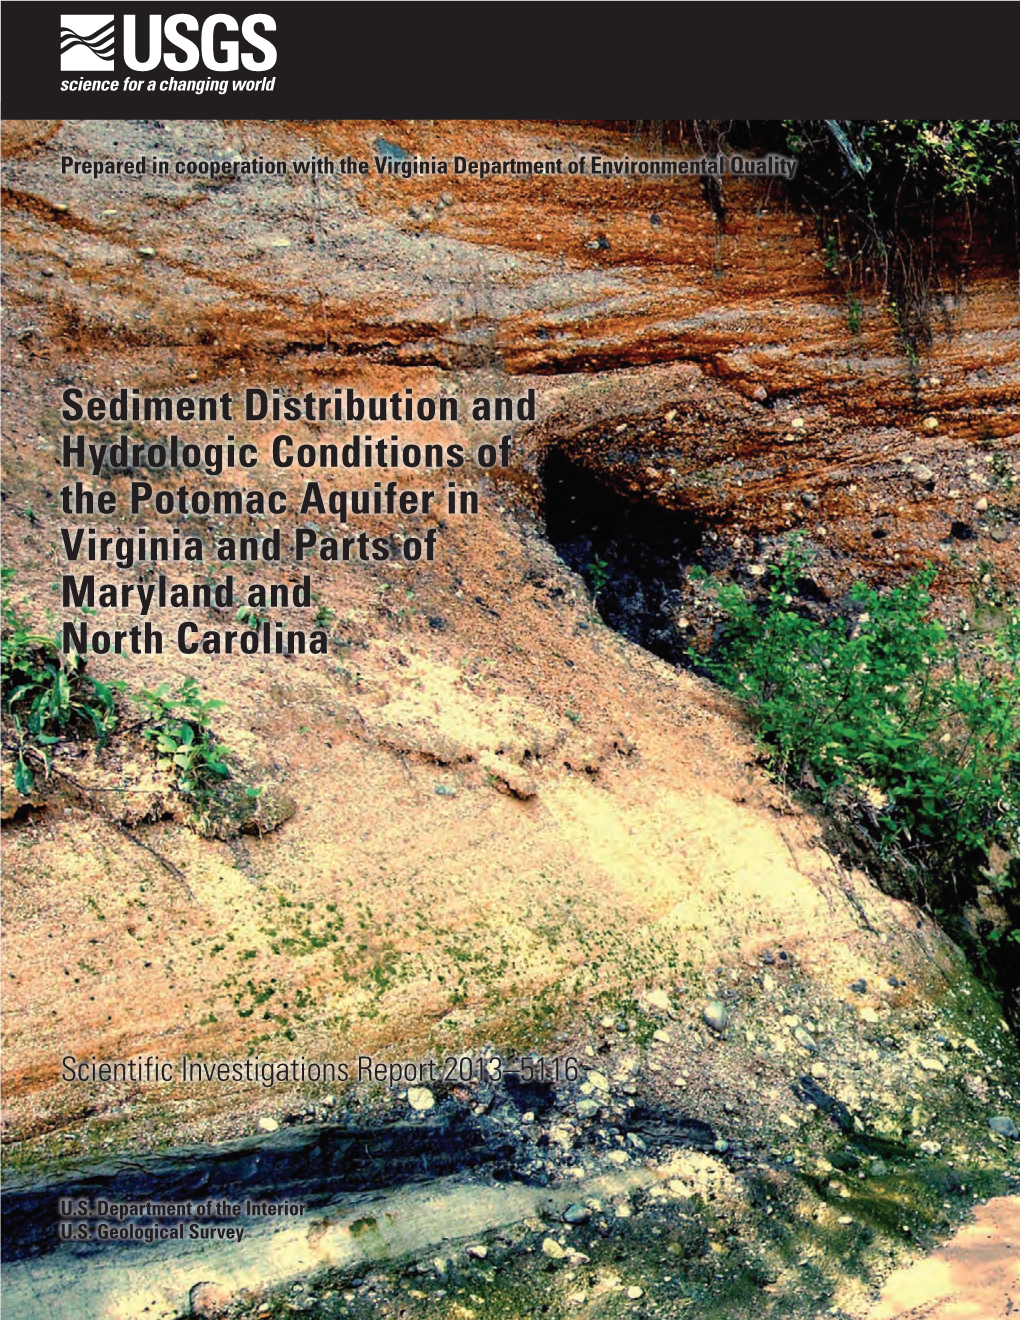 Sediment Distribution and Hydrologic Conditions of the Potomac Aquifer in Virginia and Parts of Maryland and North Carolina